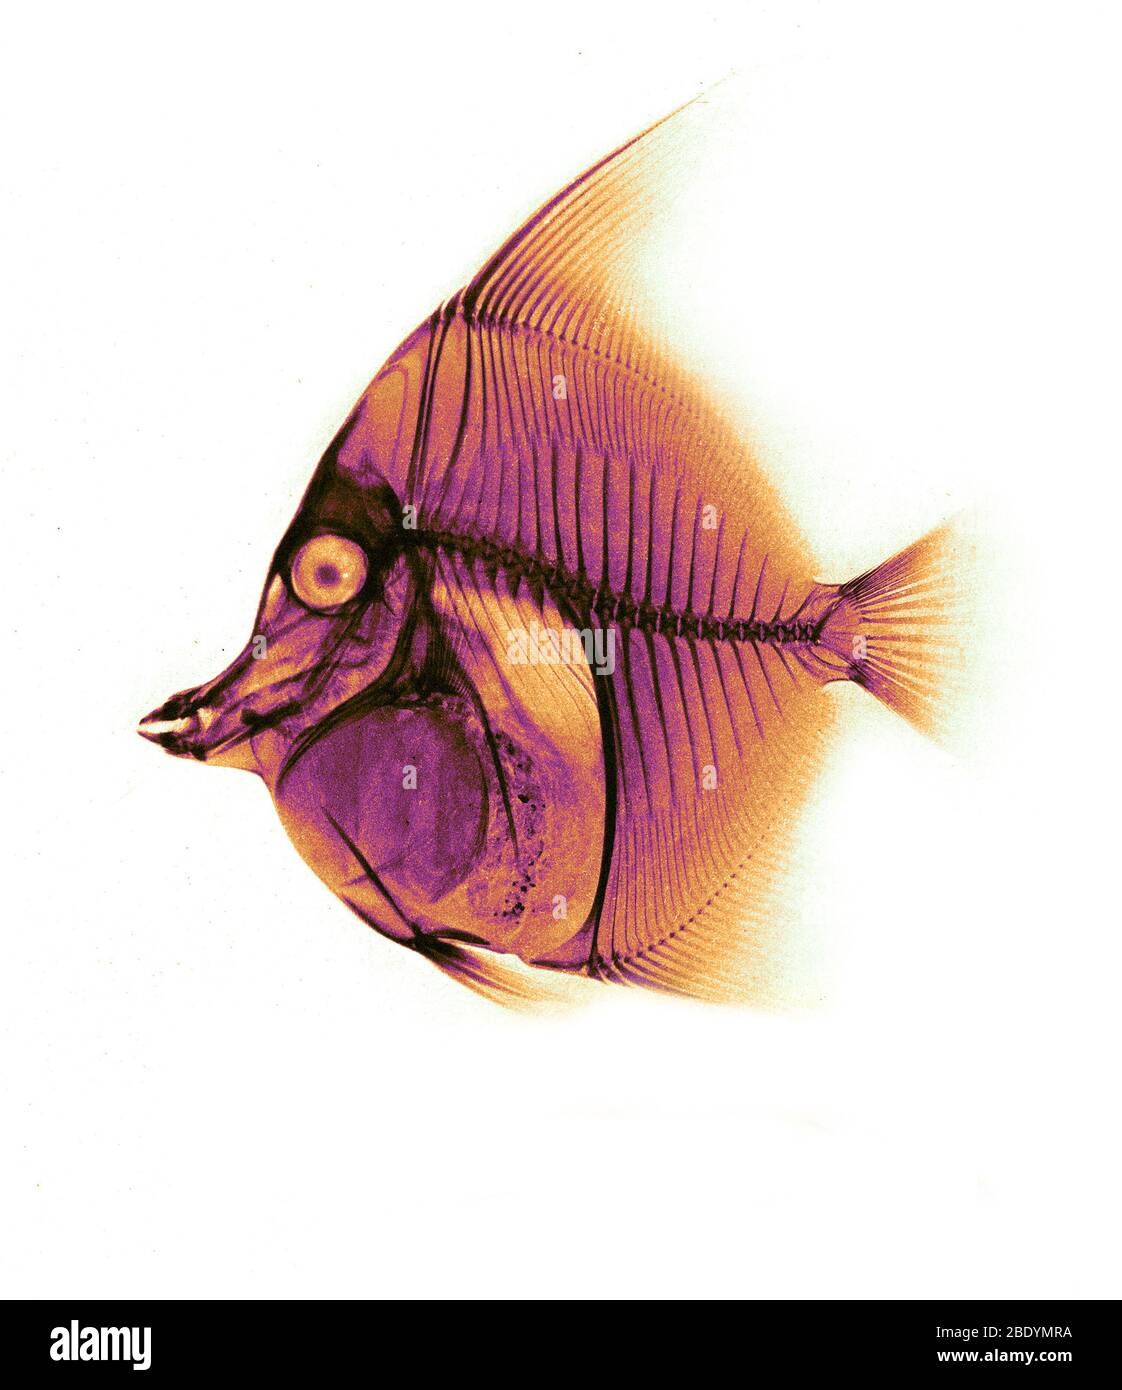 Mauresque Idol Fish, radiographie, 1896 Banque D'Images